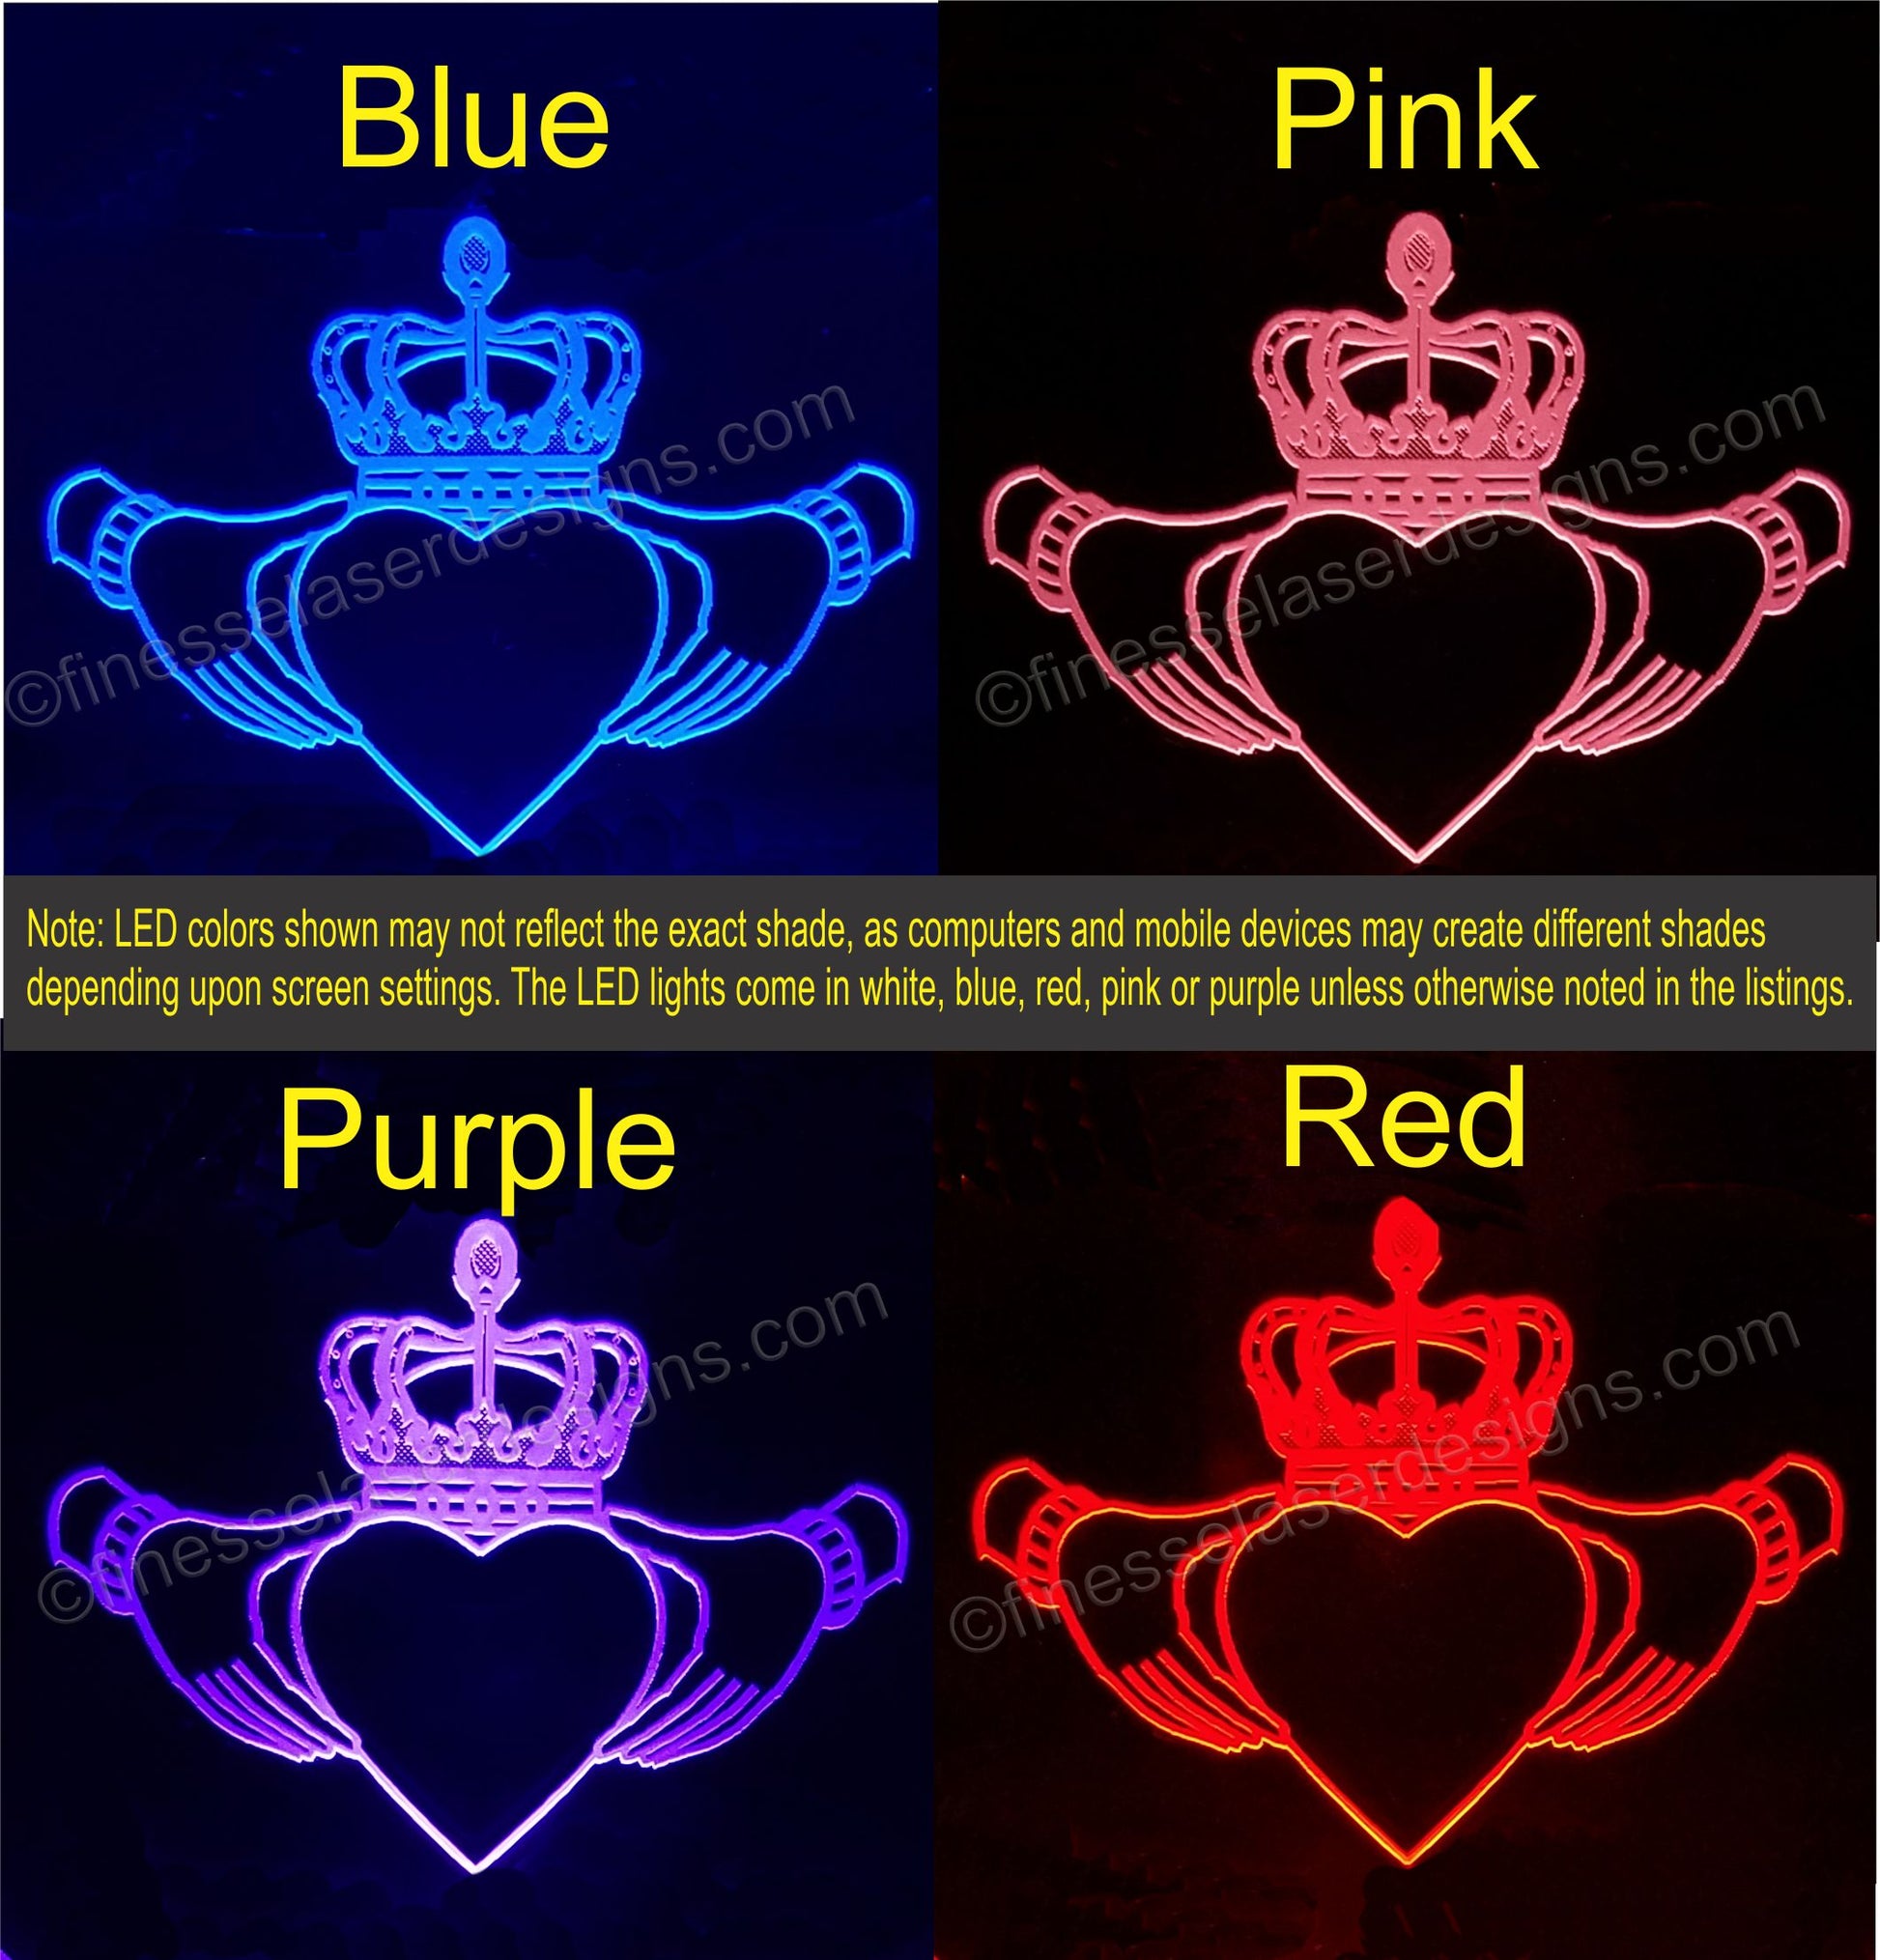 LED lights shown in a claddagh design in blue, pink, purple and red